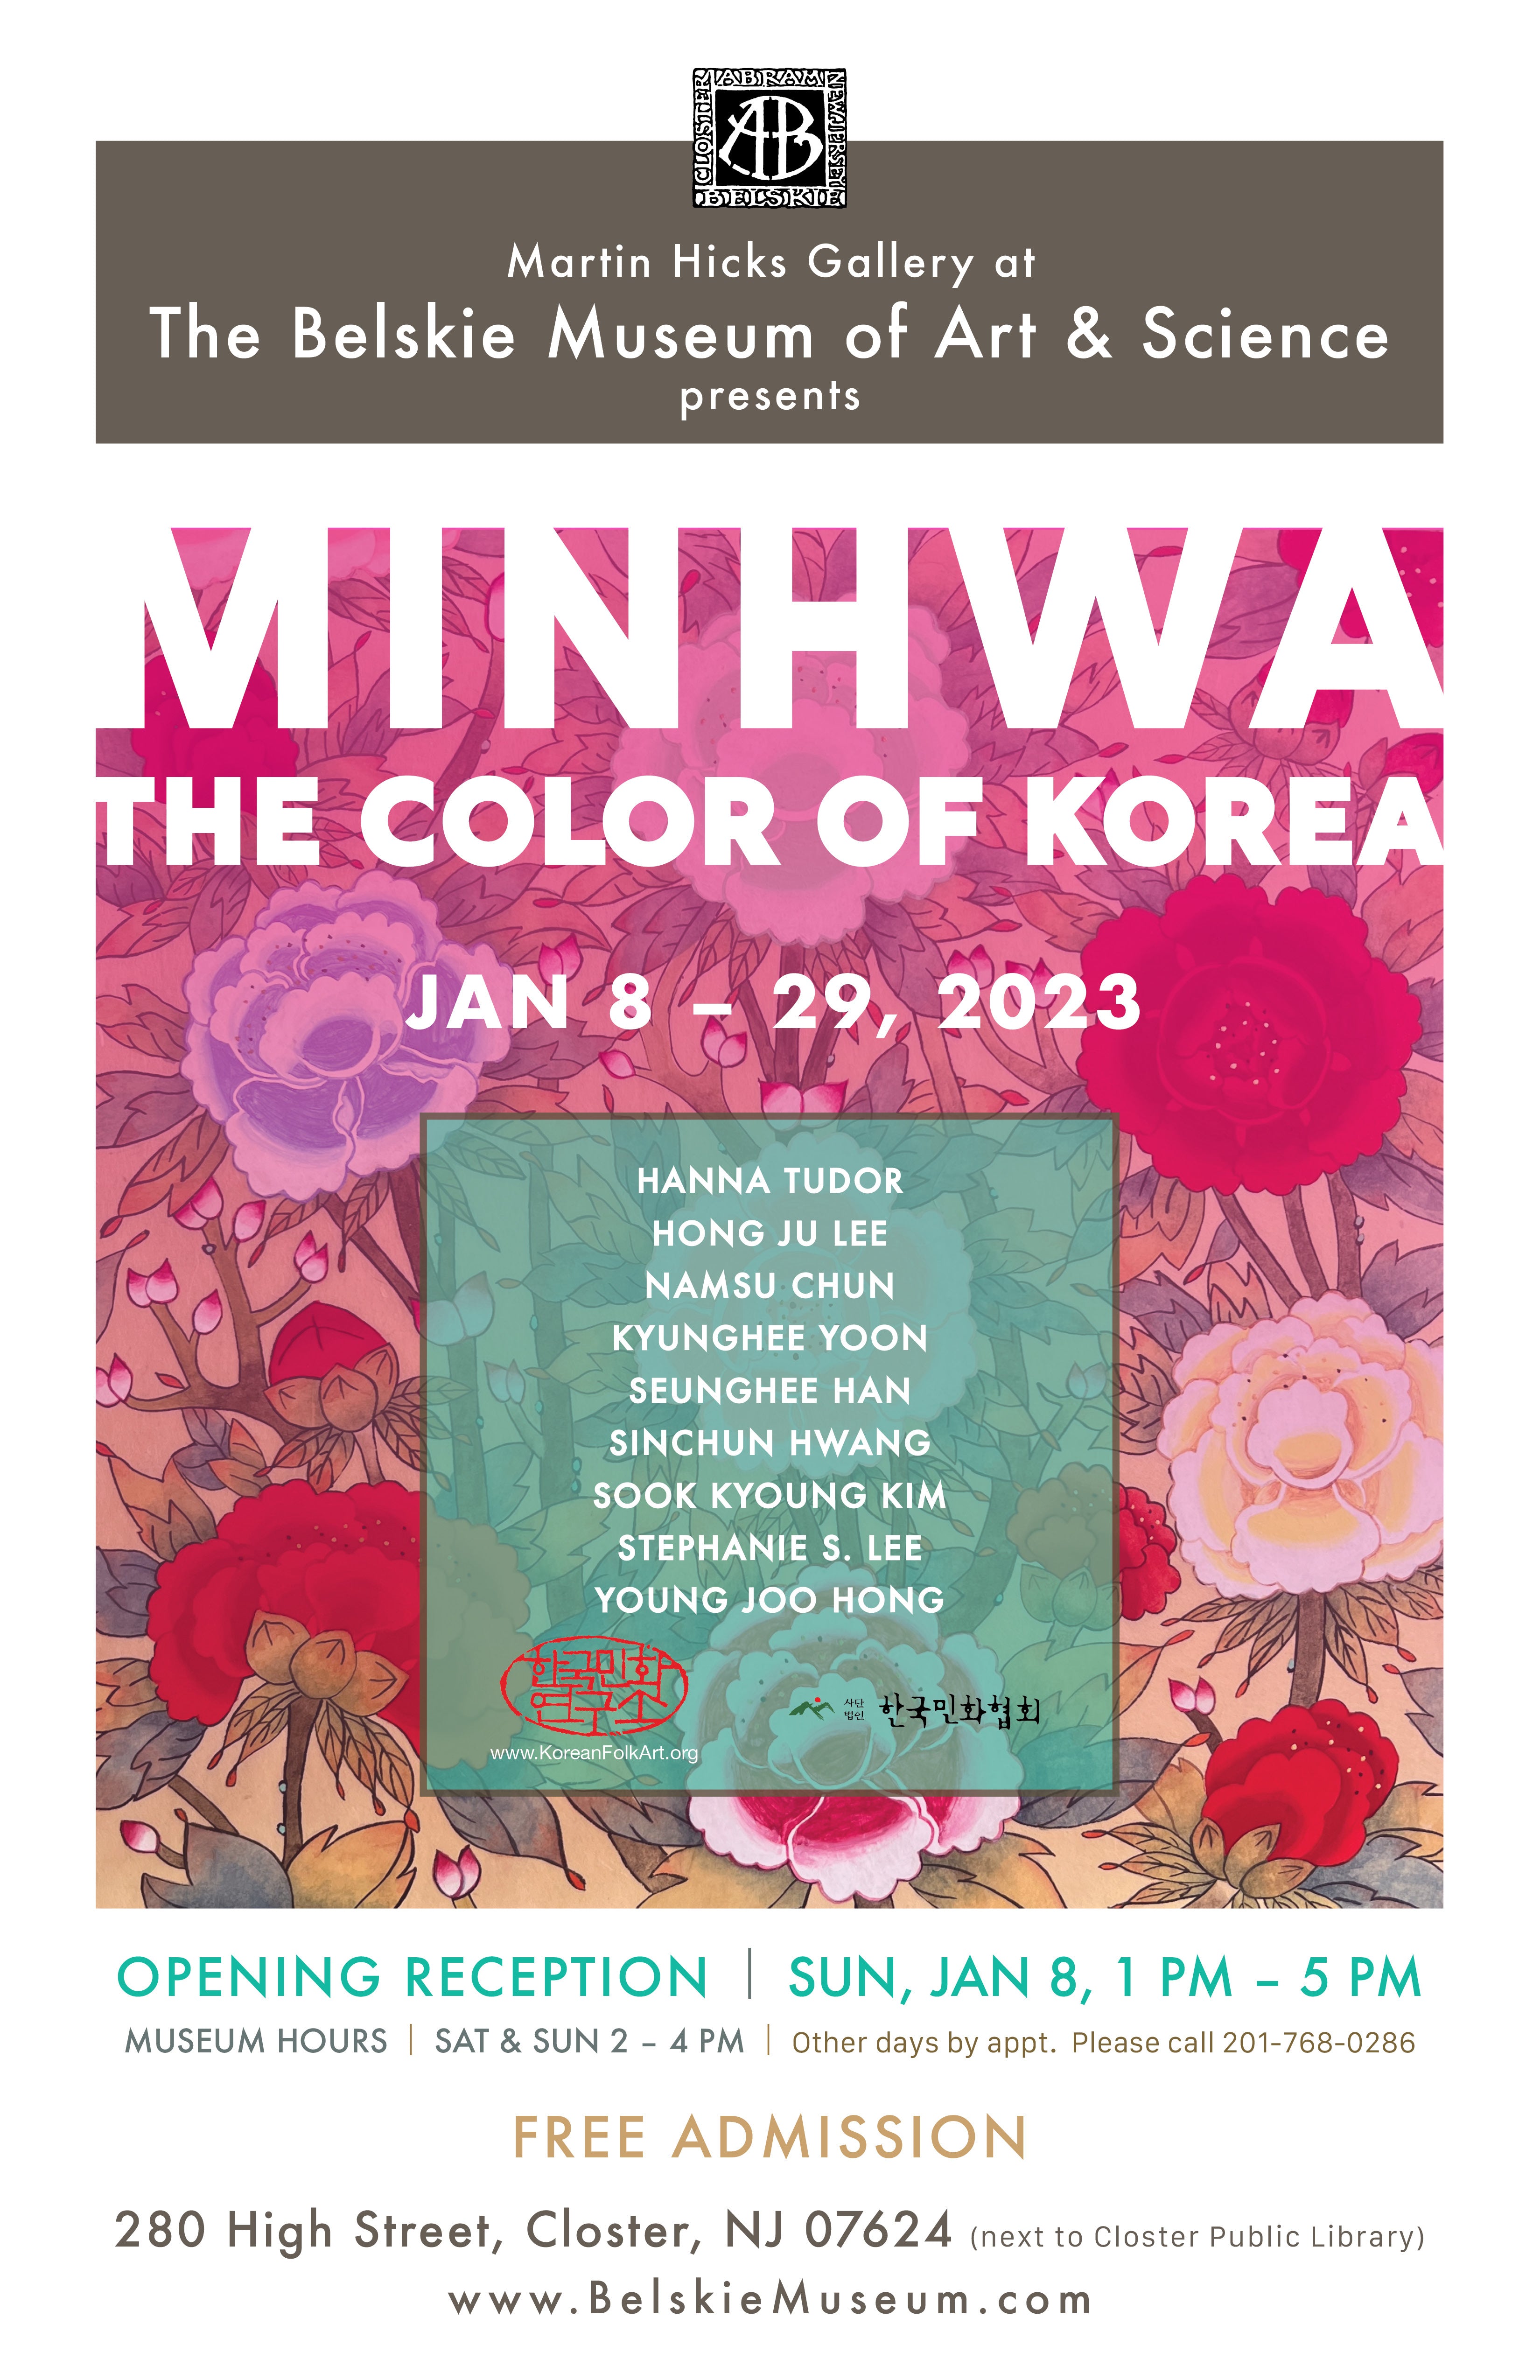 [JAN 8 - JAN 29, 2023] Martin Hicks Gallery at The Belskie Museum of Art & Science Presents Minhwa: The Color of Korea